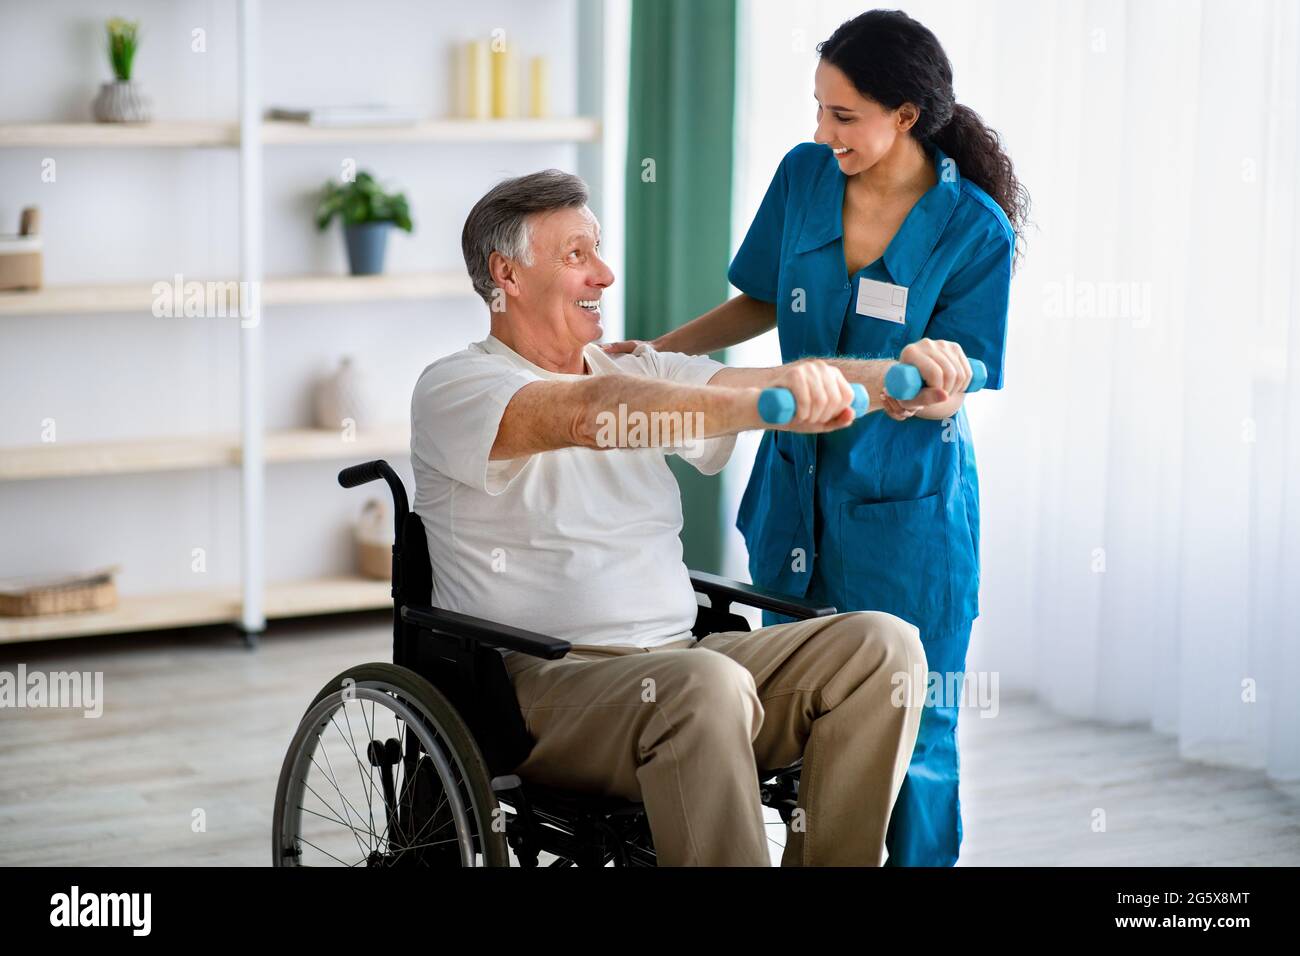 Female physiotherapist helping elderly man in wheelchair do exercises with dumbbells at health centre Stock Photo